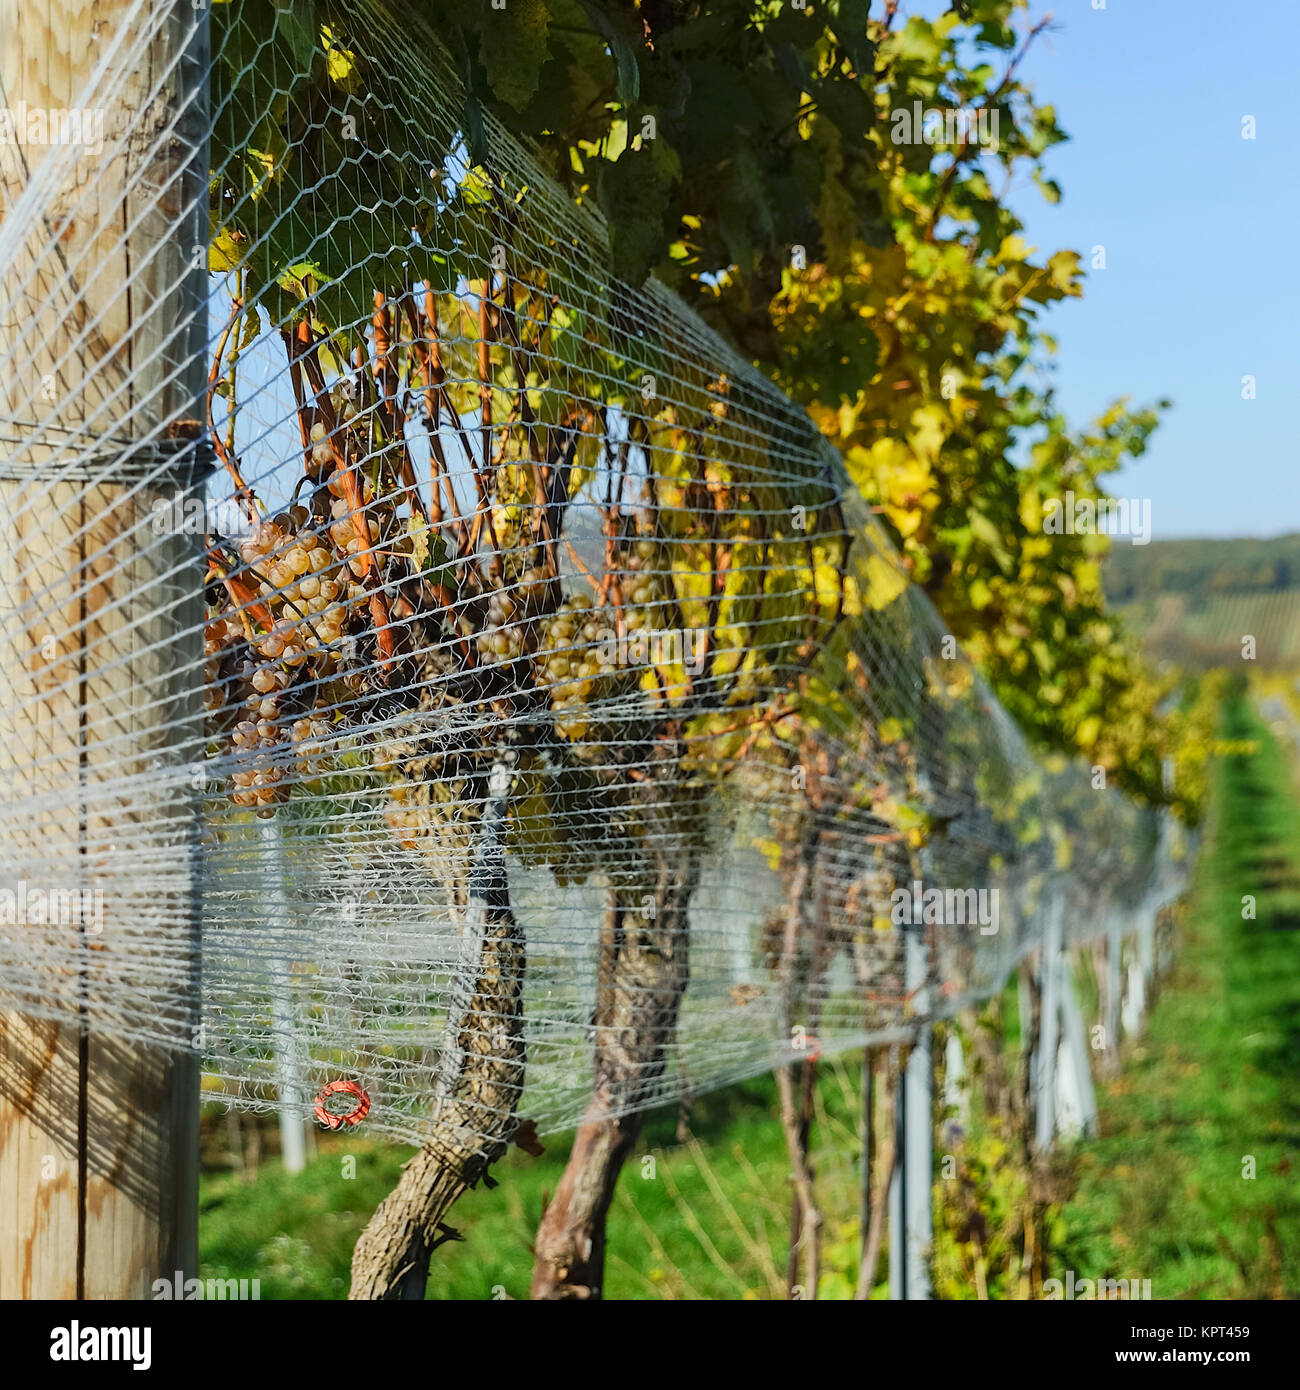 bird netting on the grapes in the vineyard Stock Photo